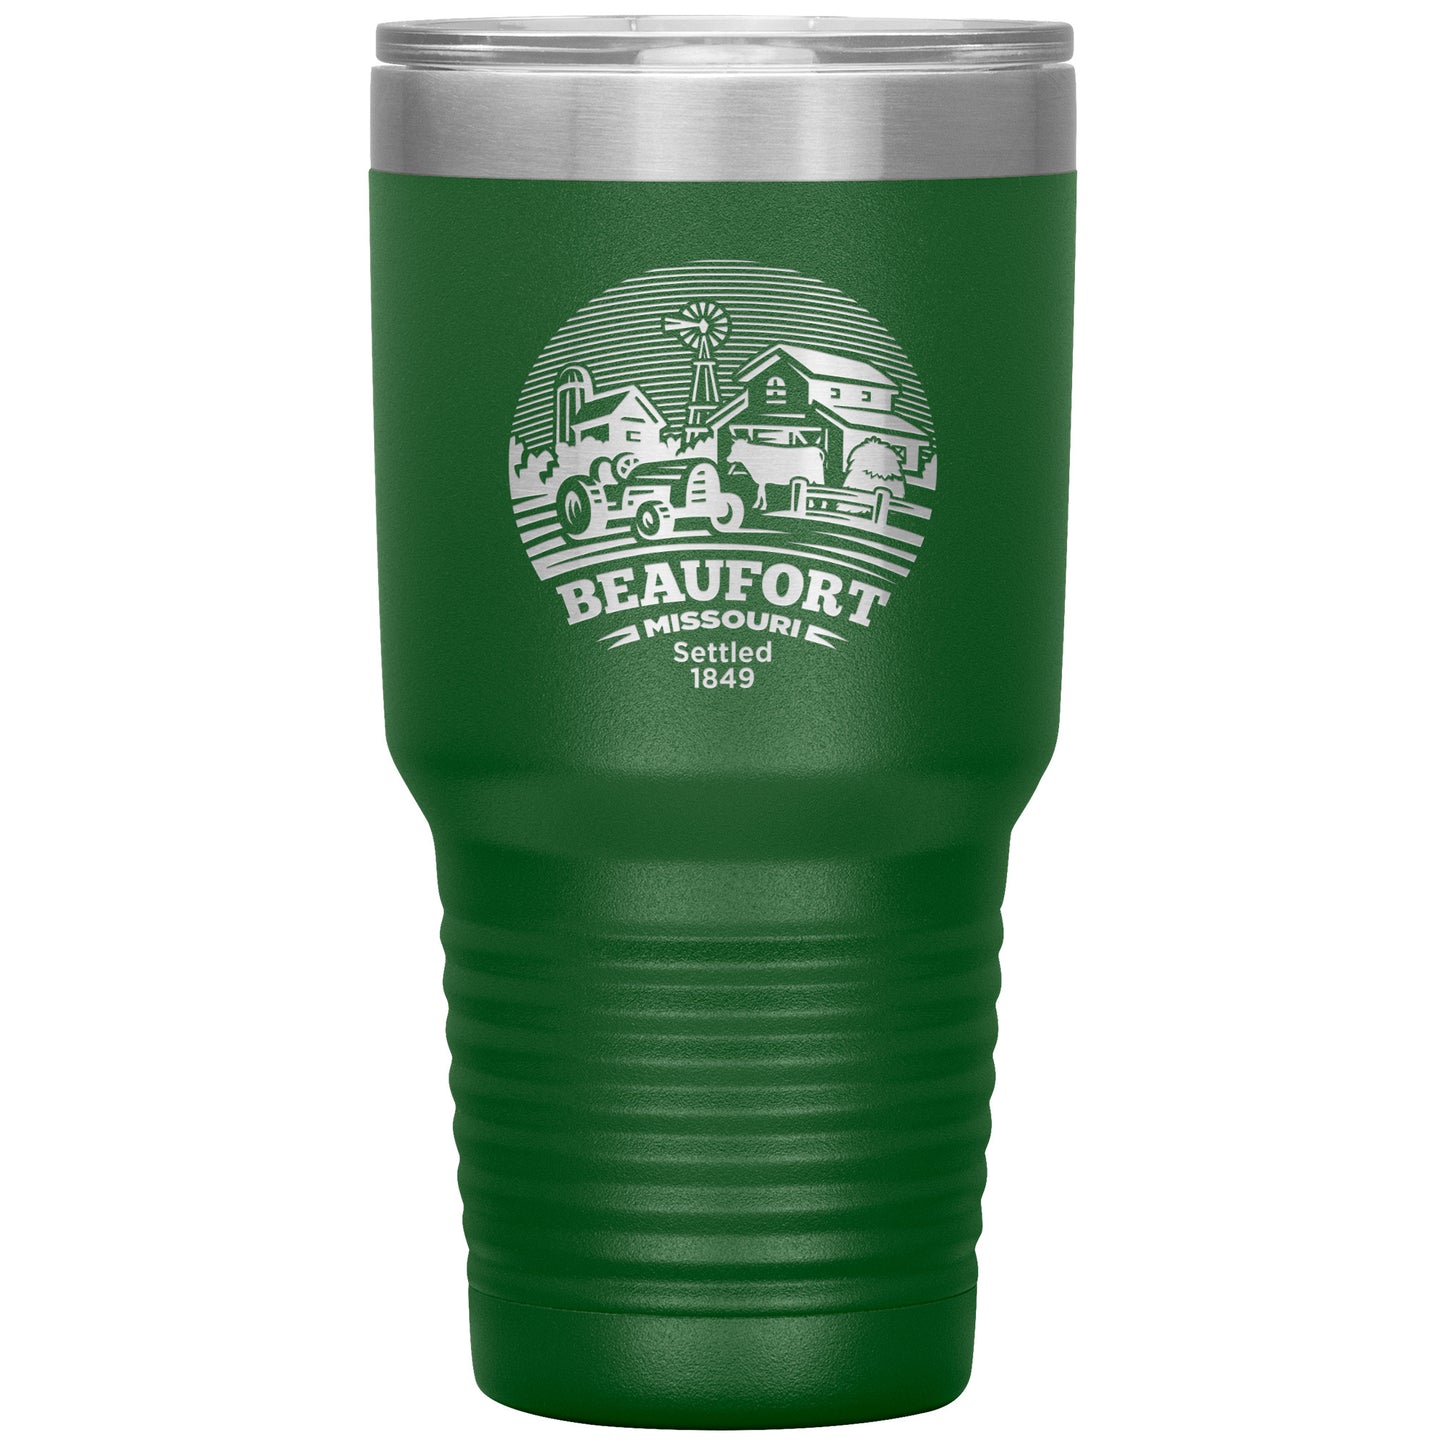 Beaufort Insulated Tumblers